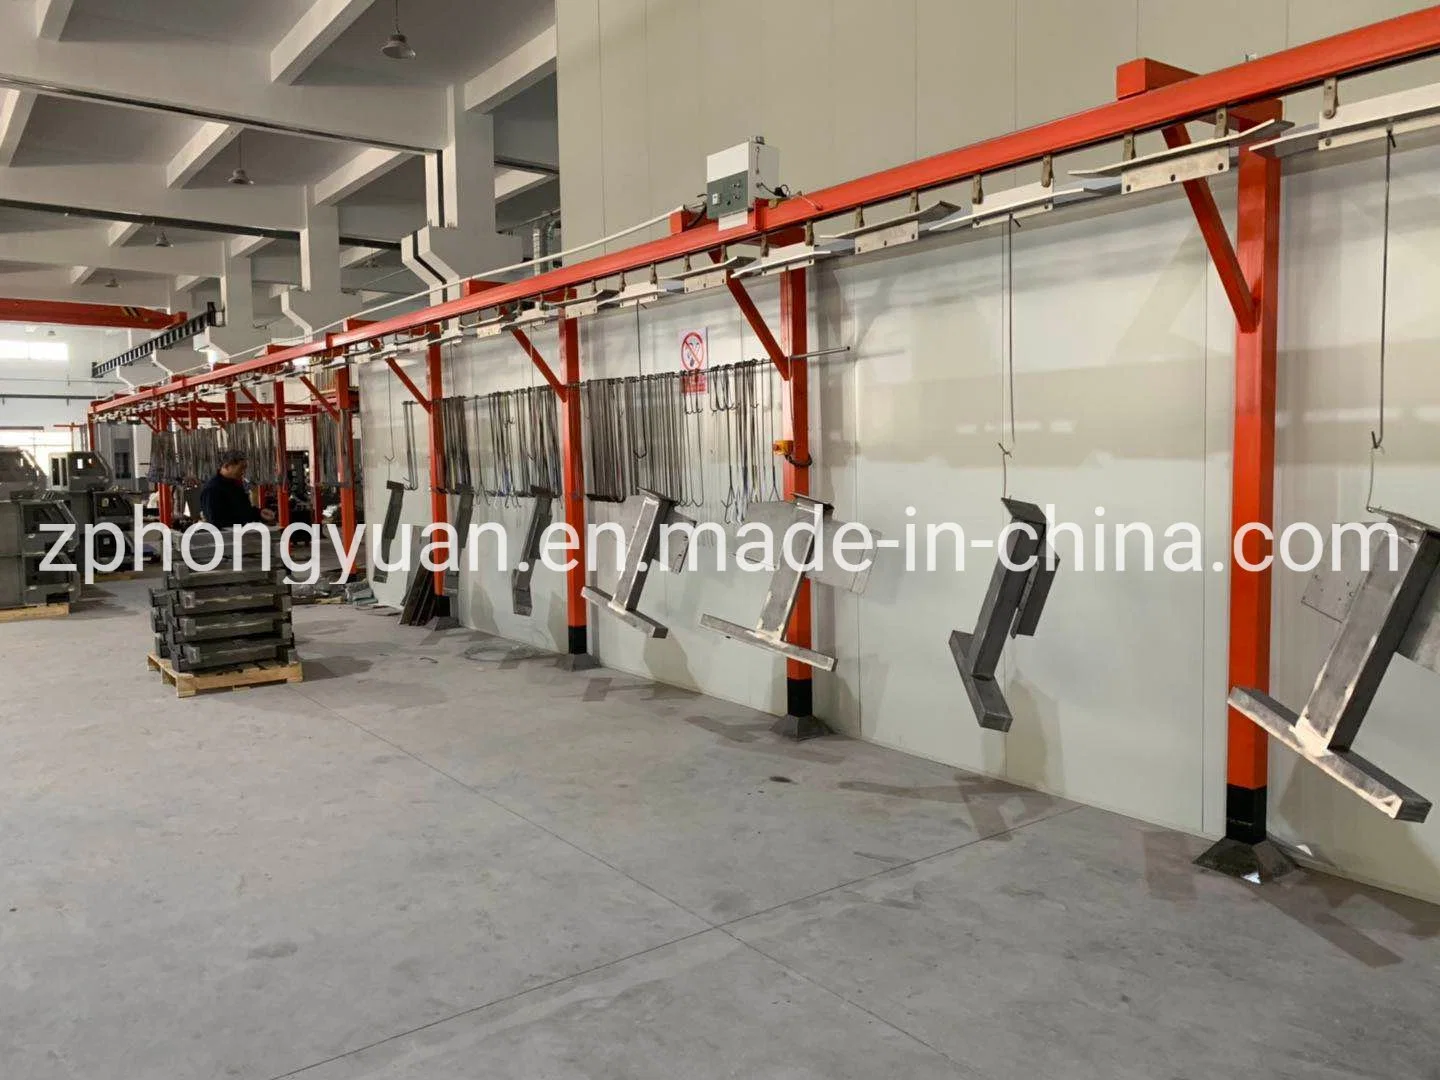 Hongyuan Manufacturing & Processing Machinery Including Powder Coating Spay Booth and Curing Oven